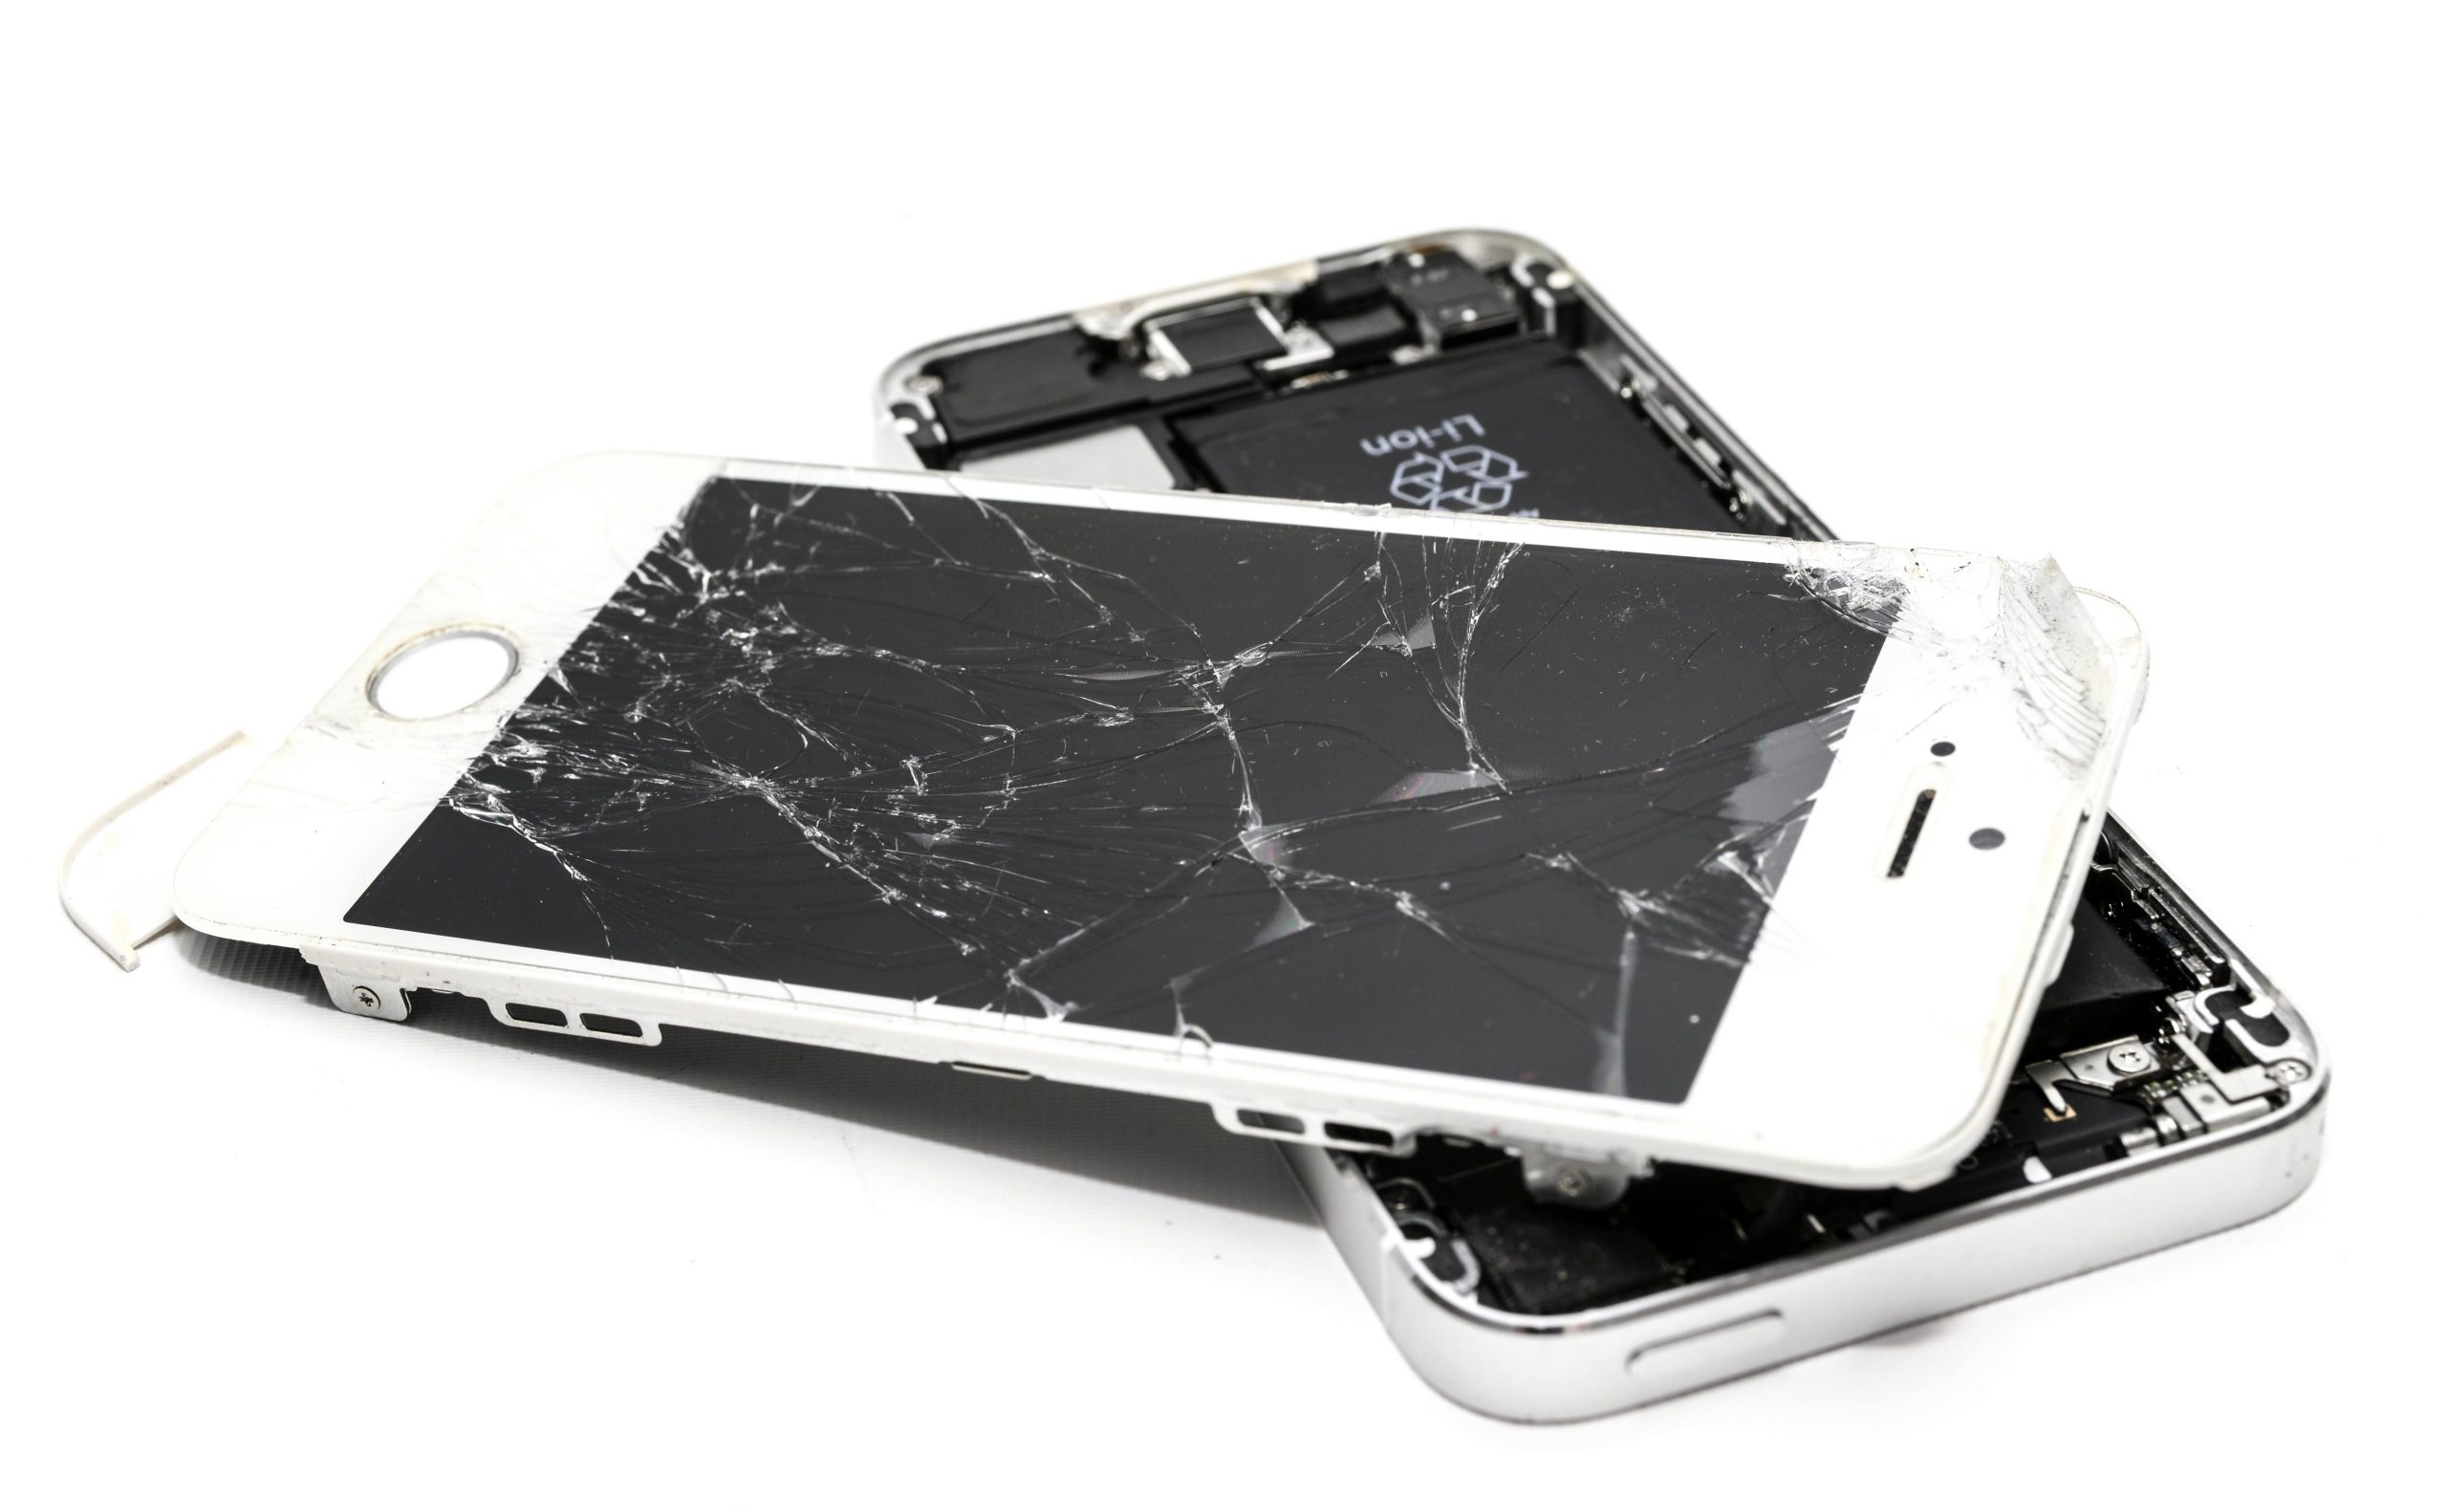 Apple to Allow Used Parts for iPhone Repairs, Improving Sustainability and Customer Choice